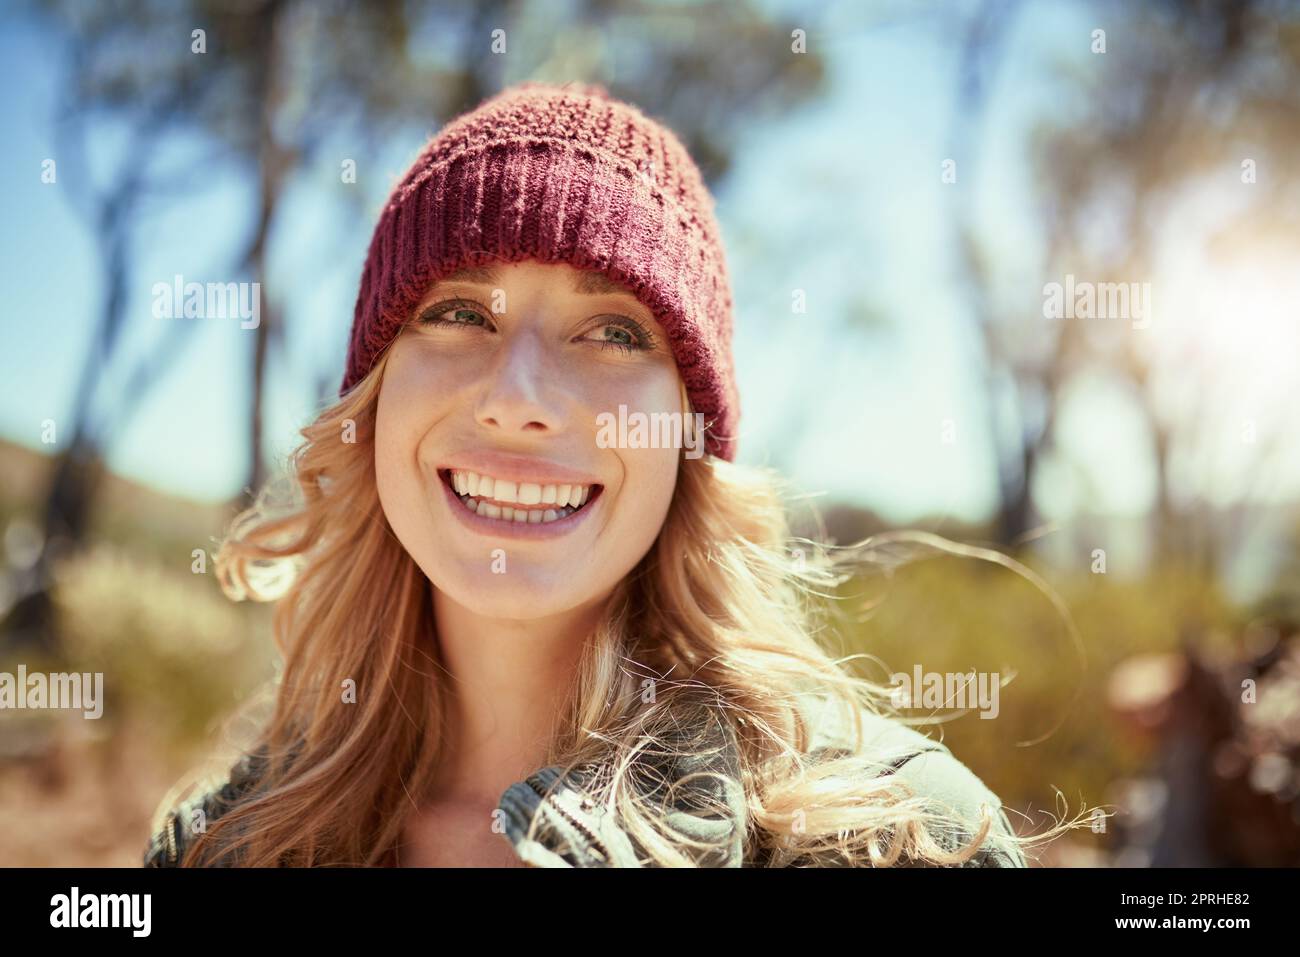 She loves being out here. a young woman hiking. Stock Photo